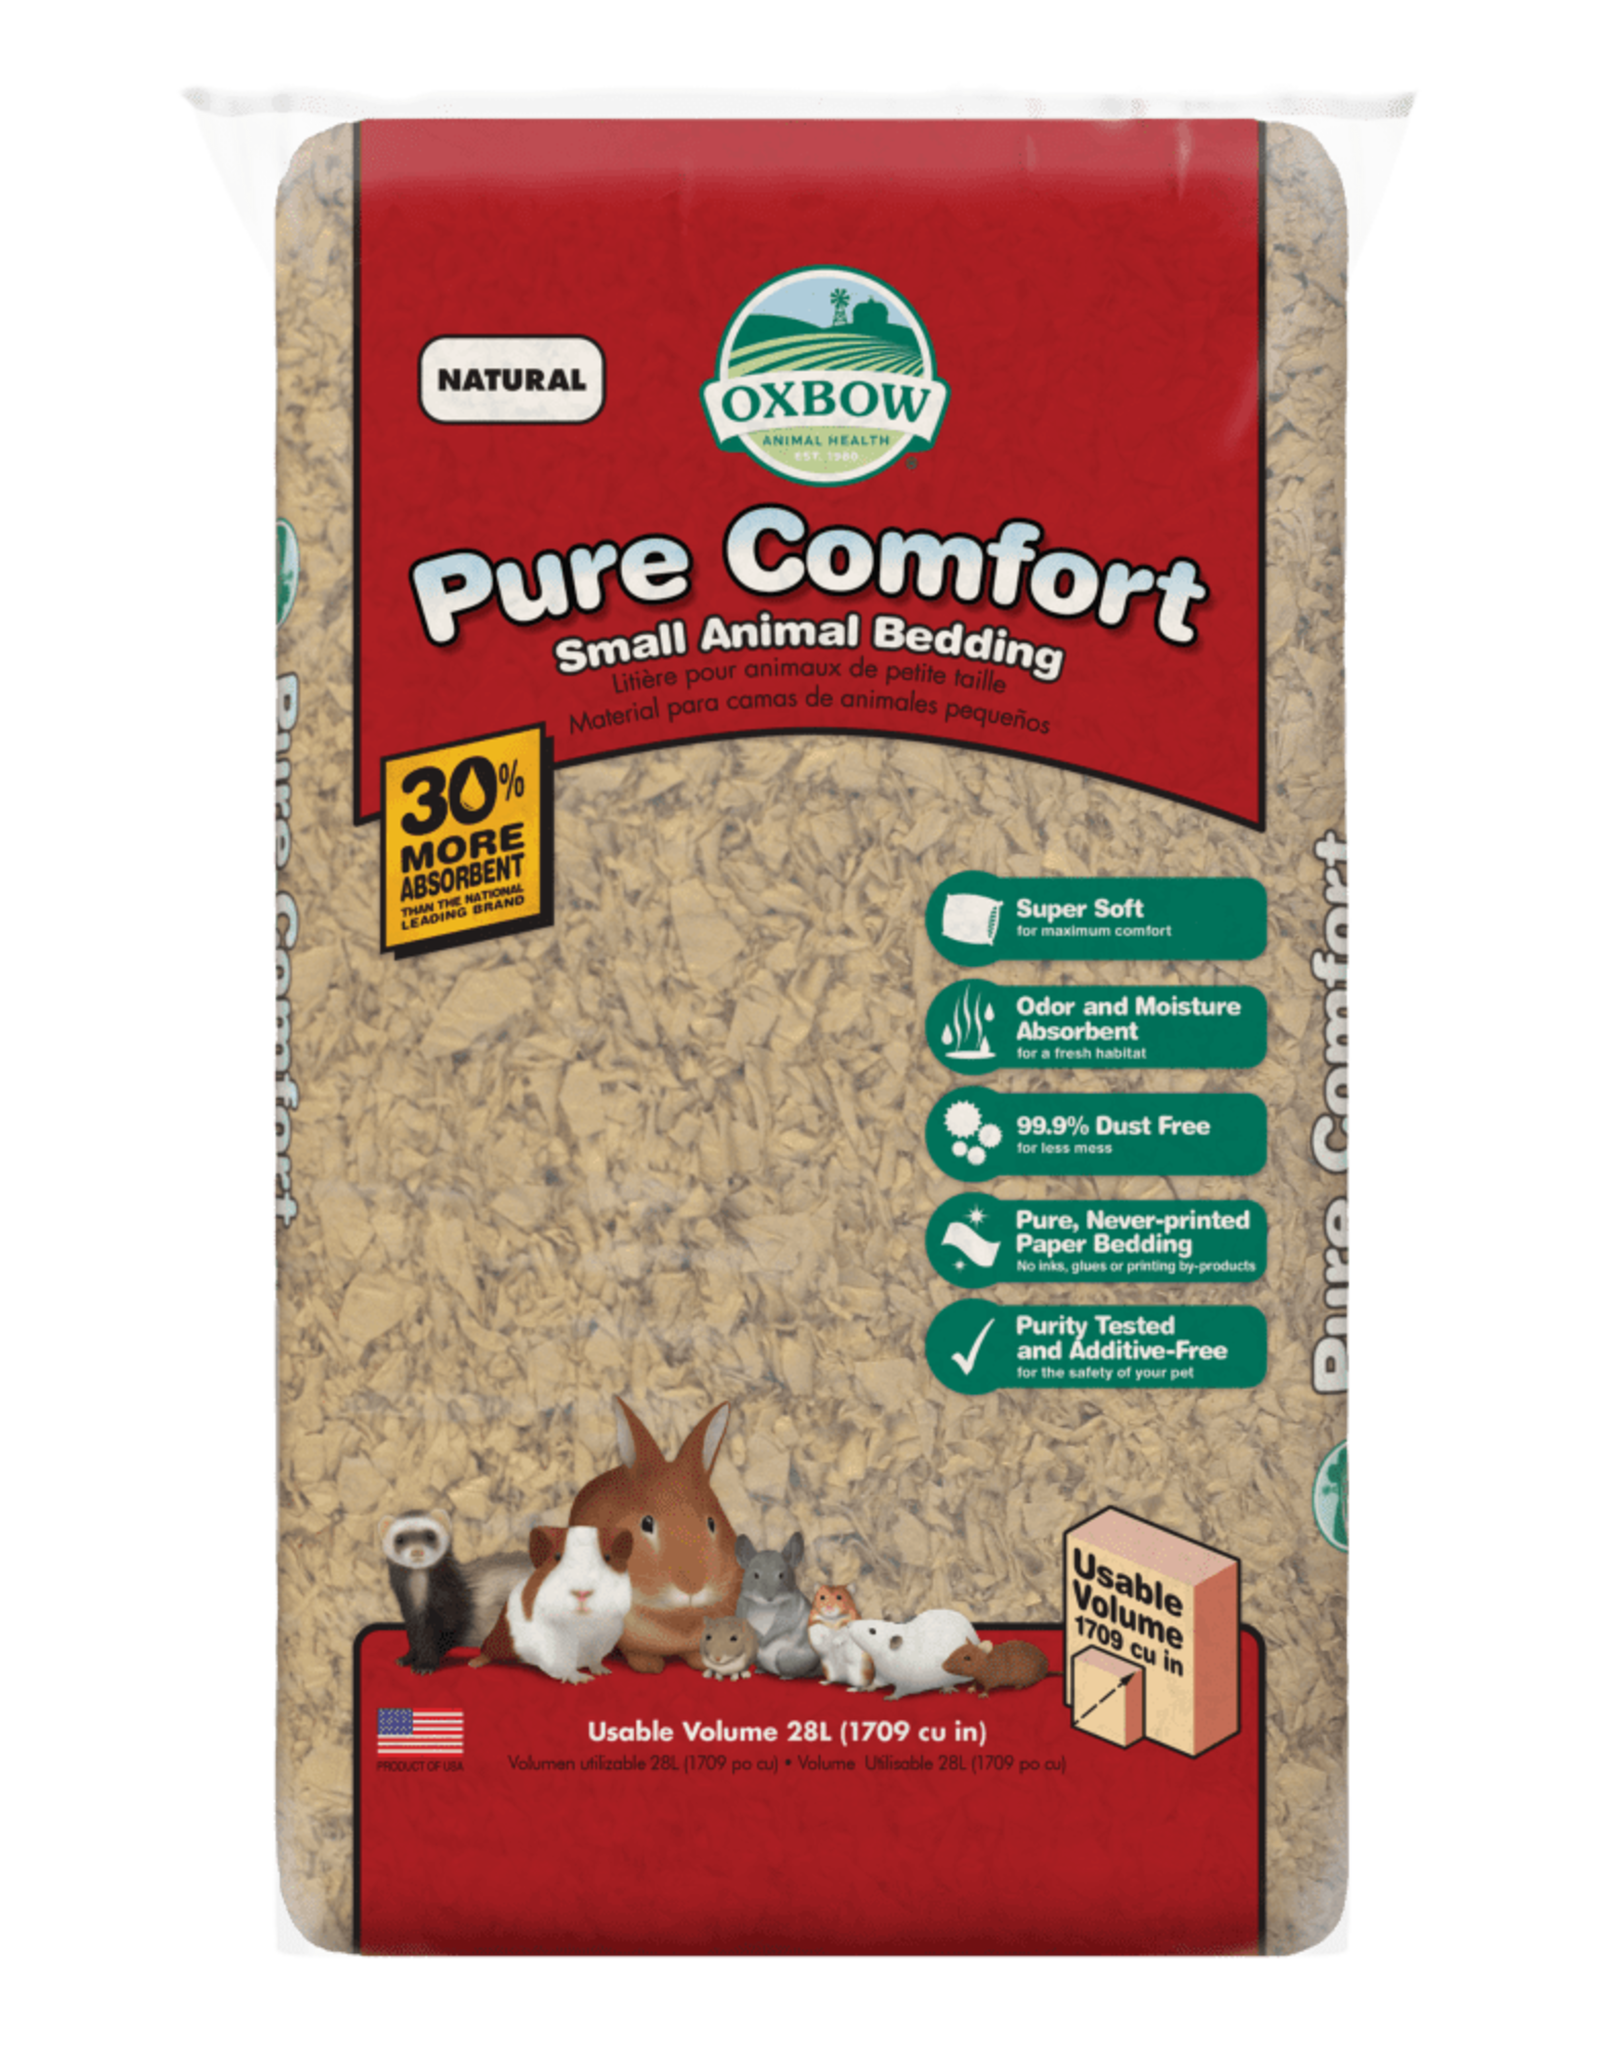 OXBOW PET PRODUCTS OXBOW PURE COMFORT BEDDING NATURAL 28L